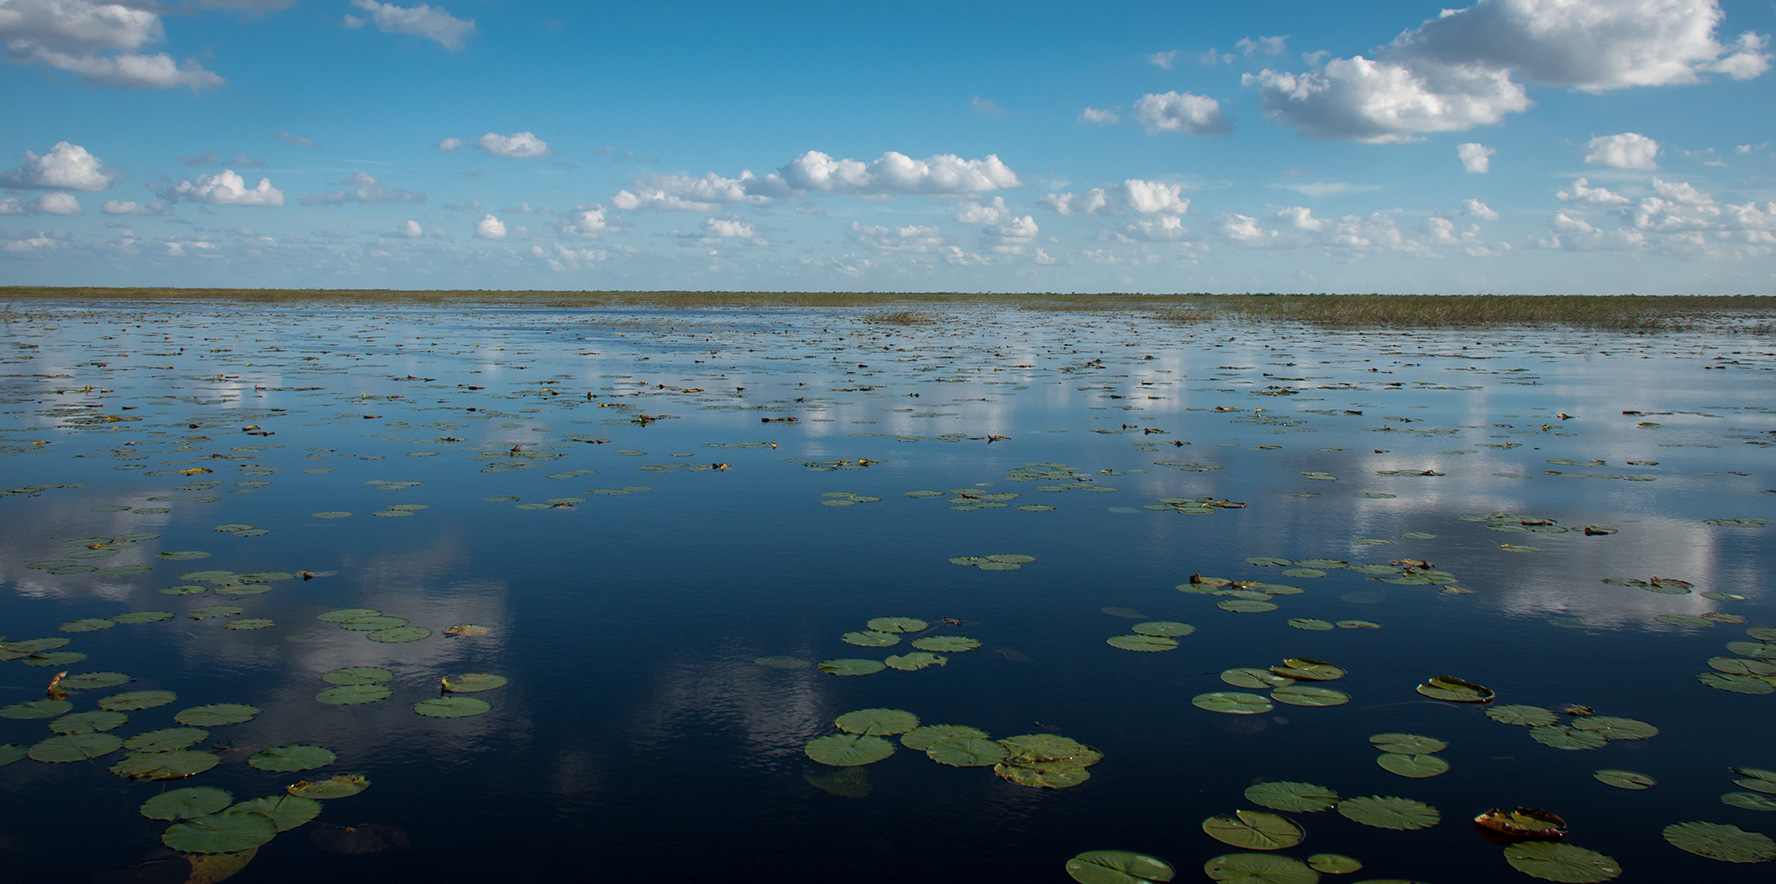 Airboat ride into the Everglades